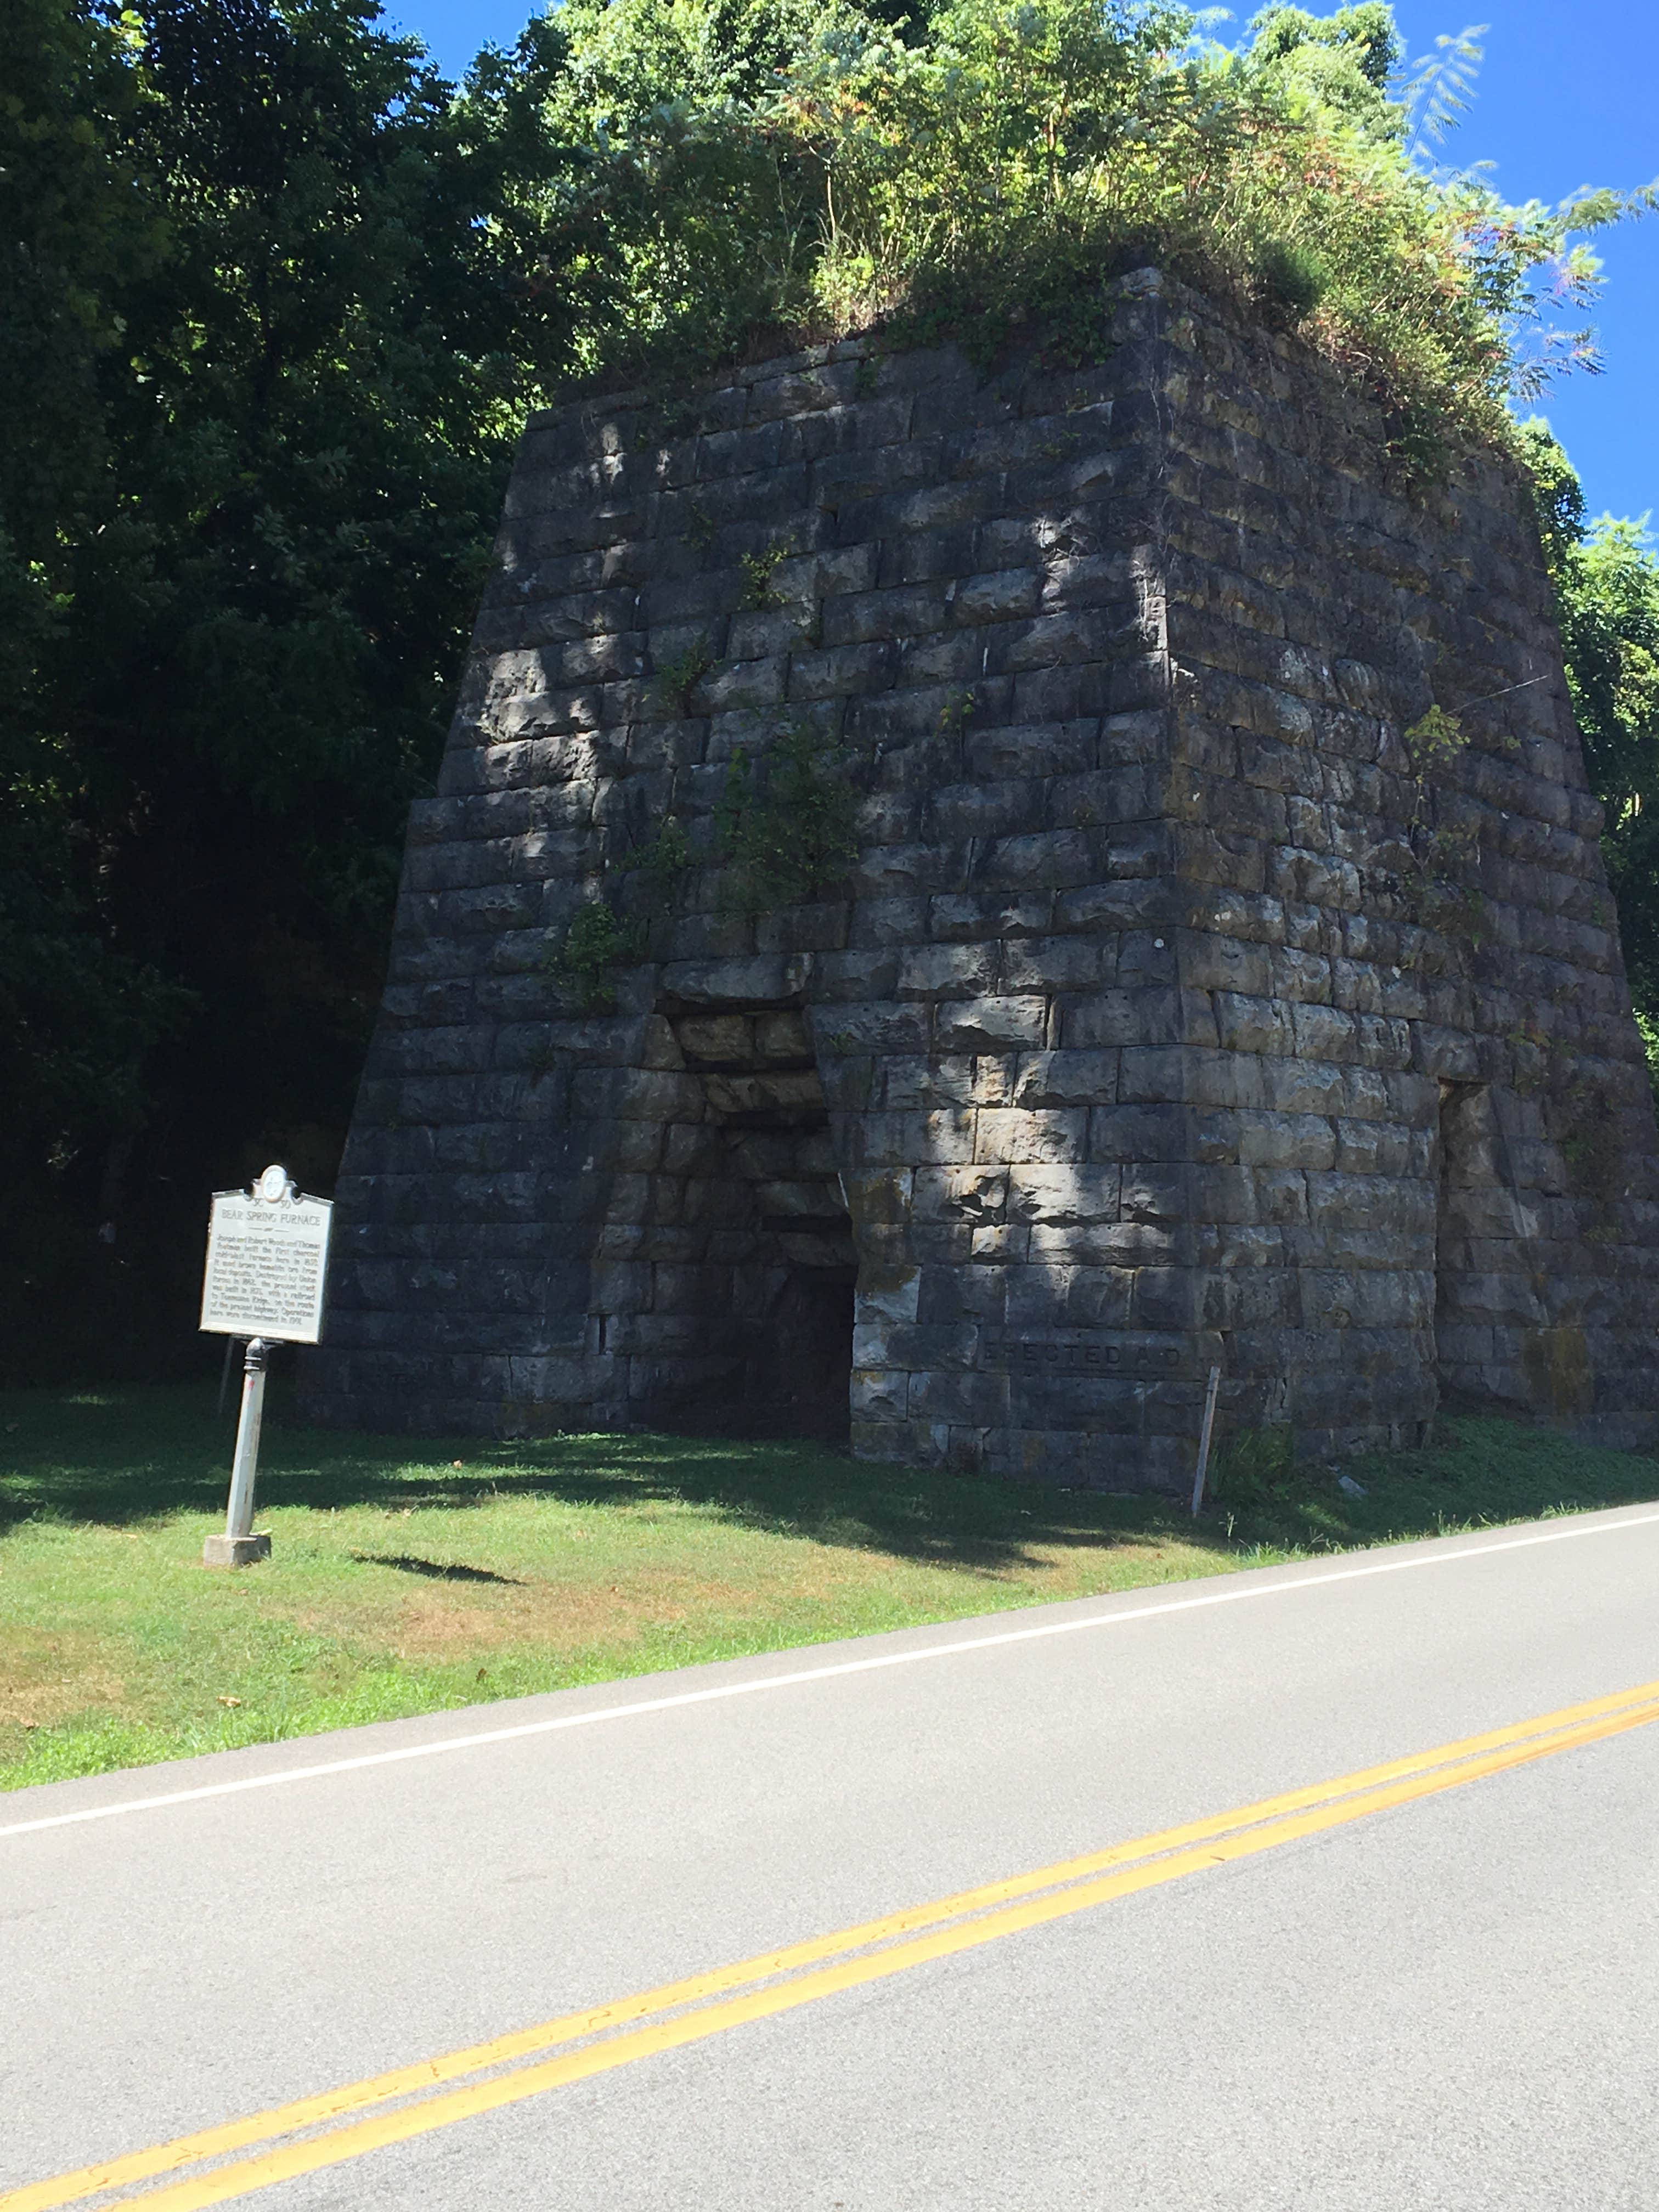 Iron furnace, all kinds of history round here